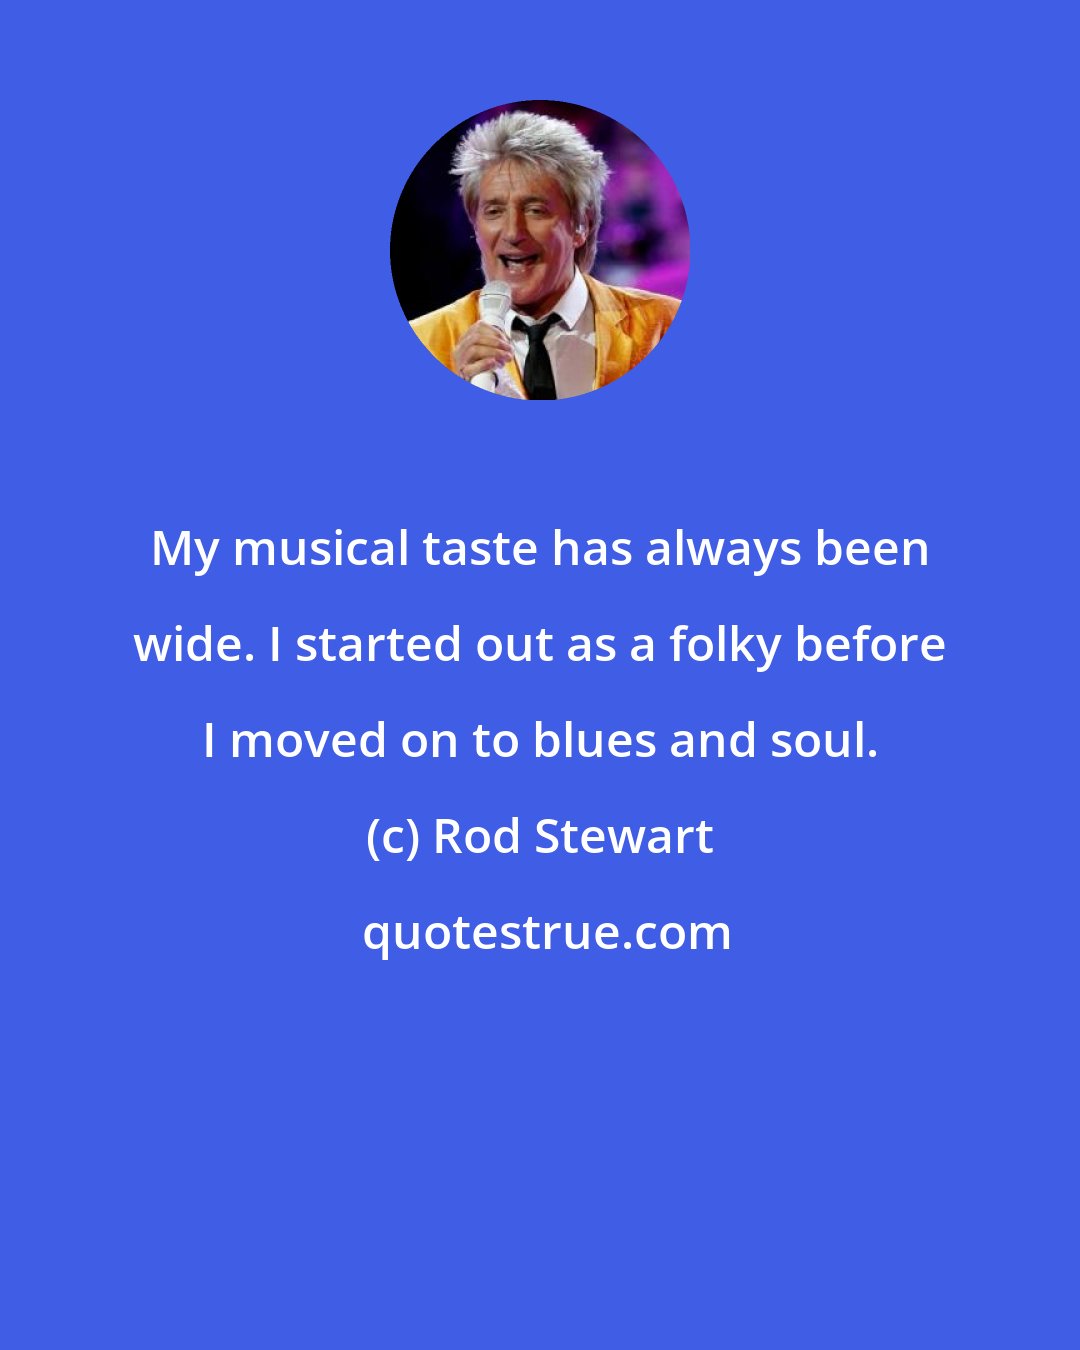 Rod Stewart: My musical taste has always been wide. I started out as a folky before I moved on to blues and soul.